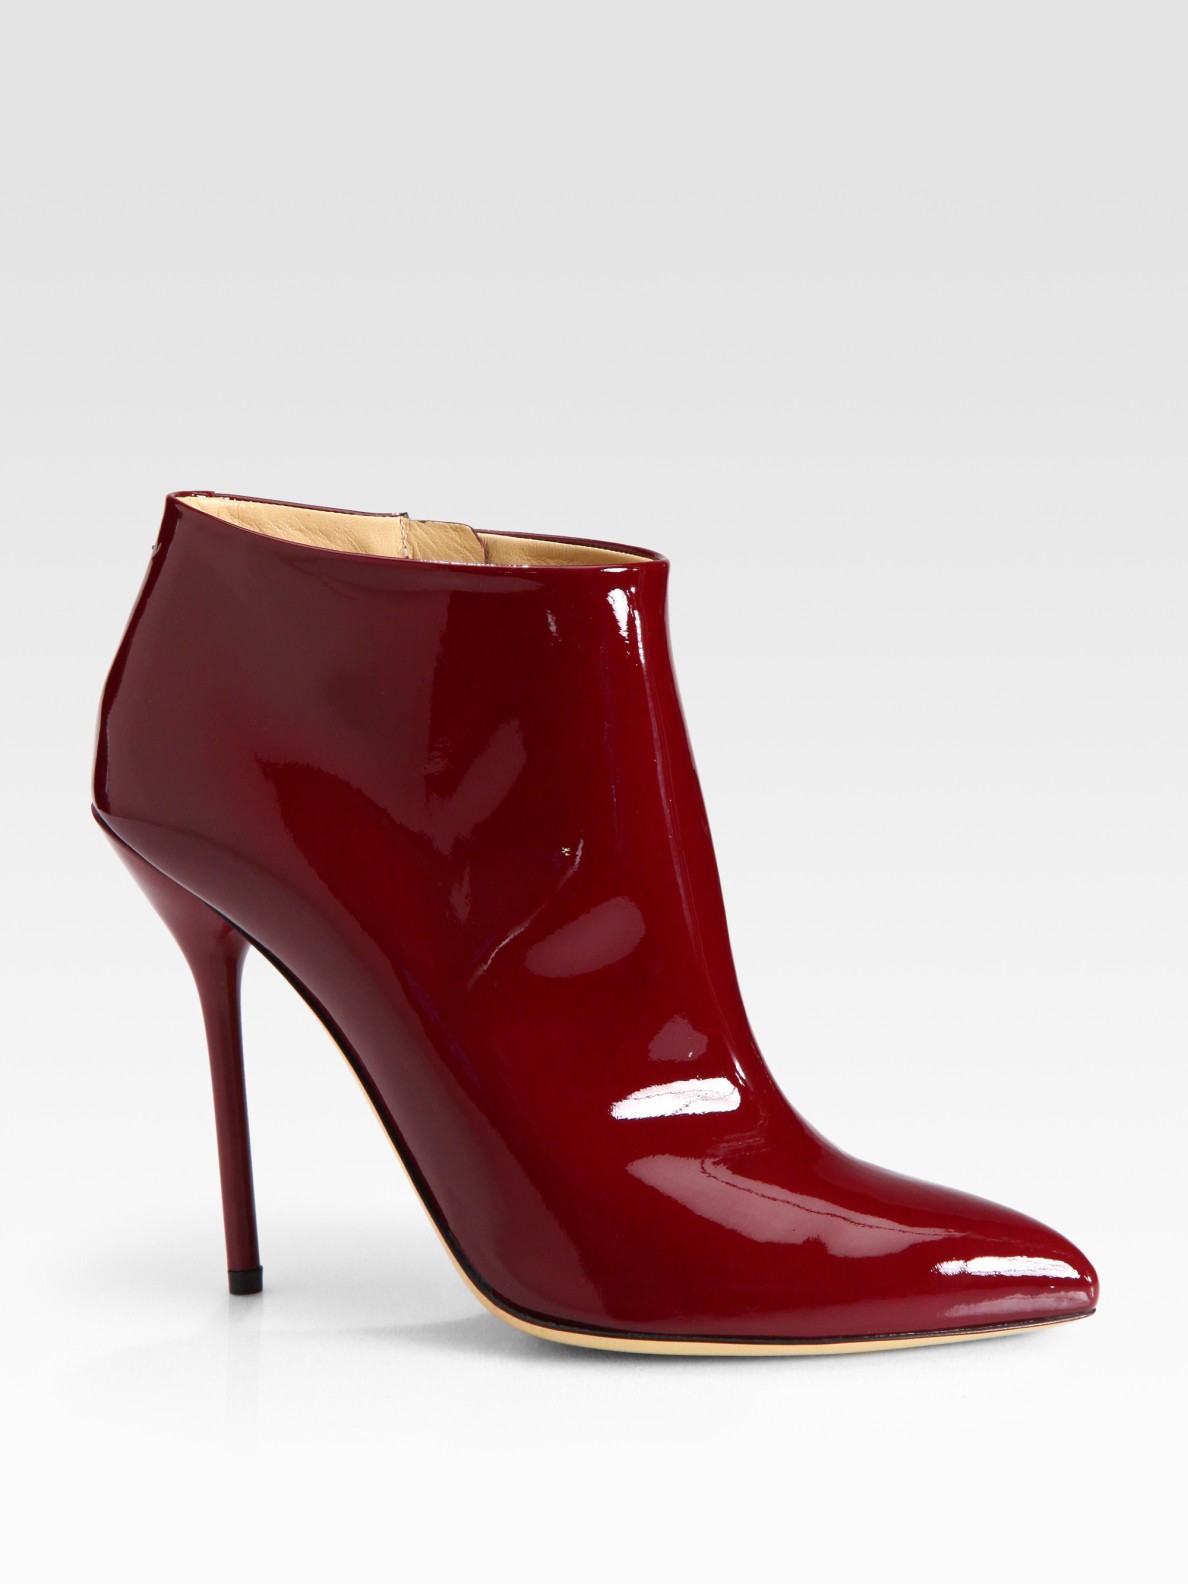 Gucci Noah Patent Leather Ankle Boots in Red Lyst